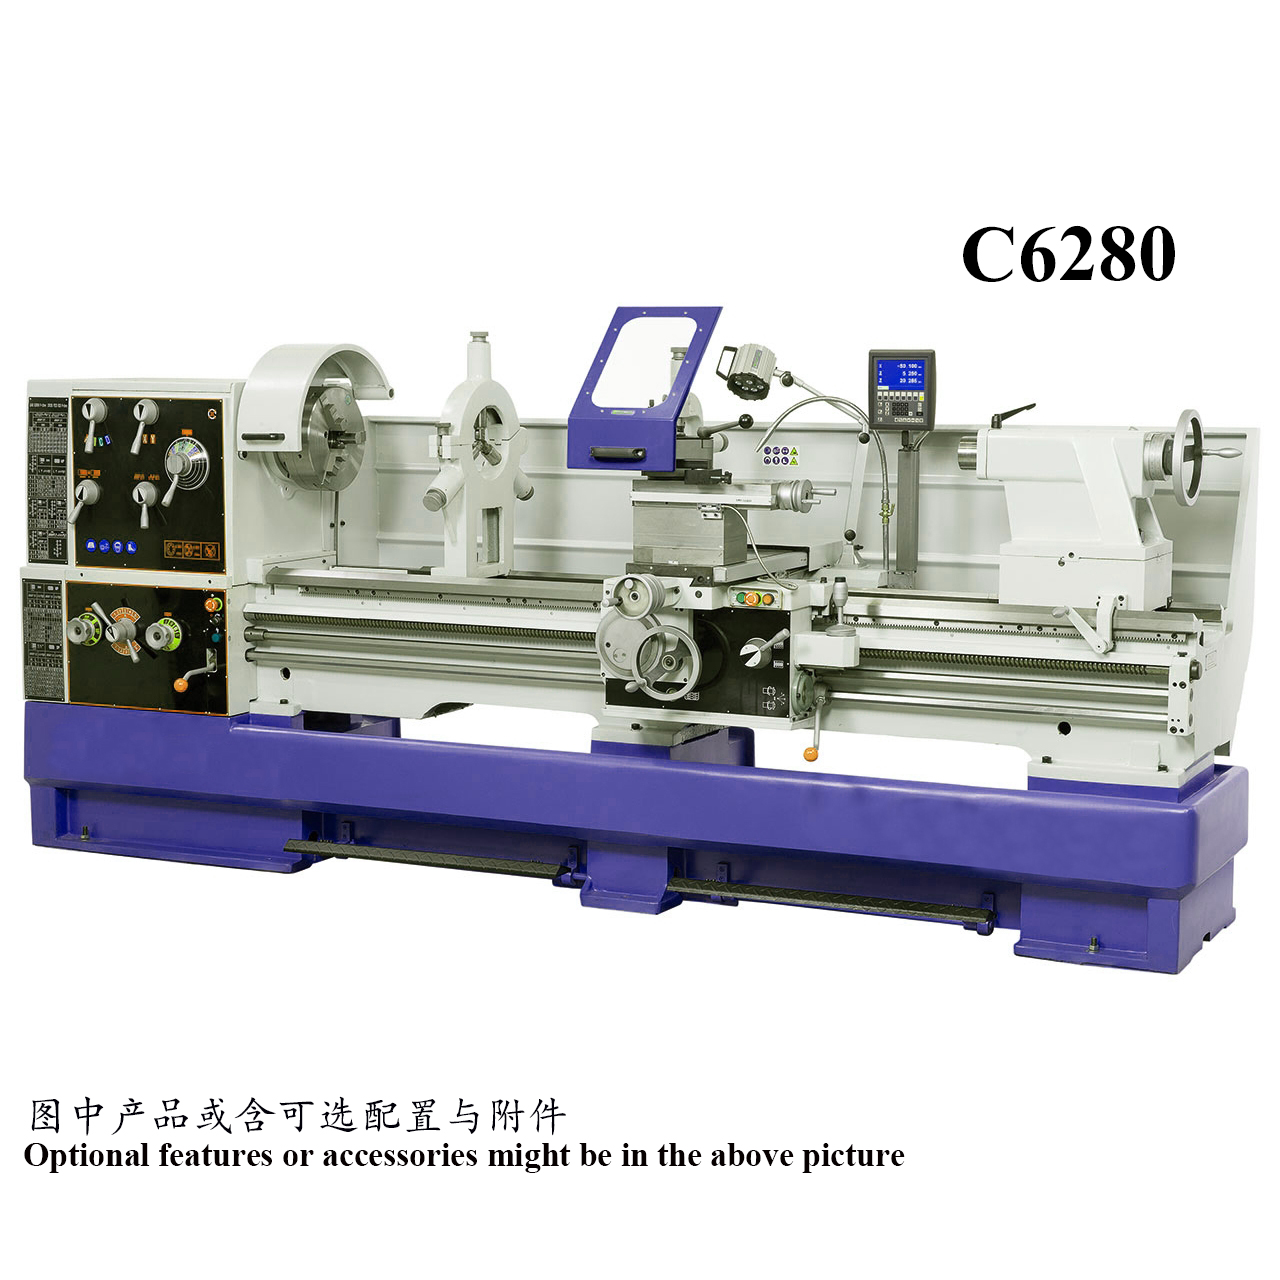 Conventional Lathes